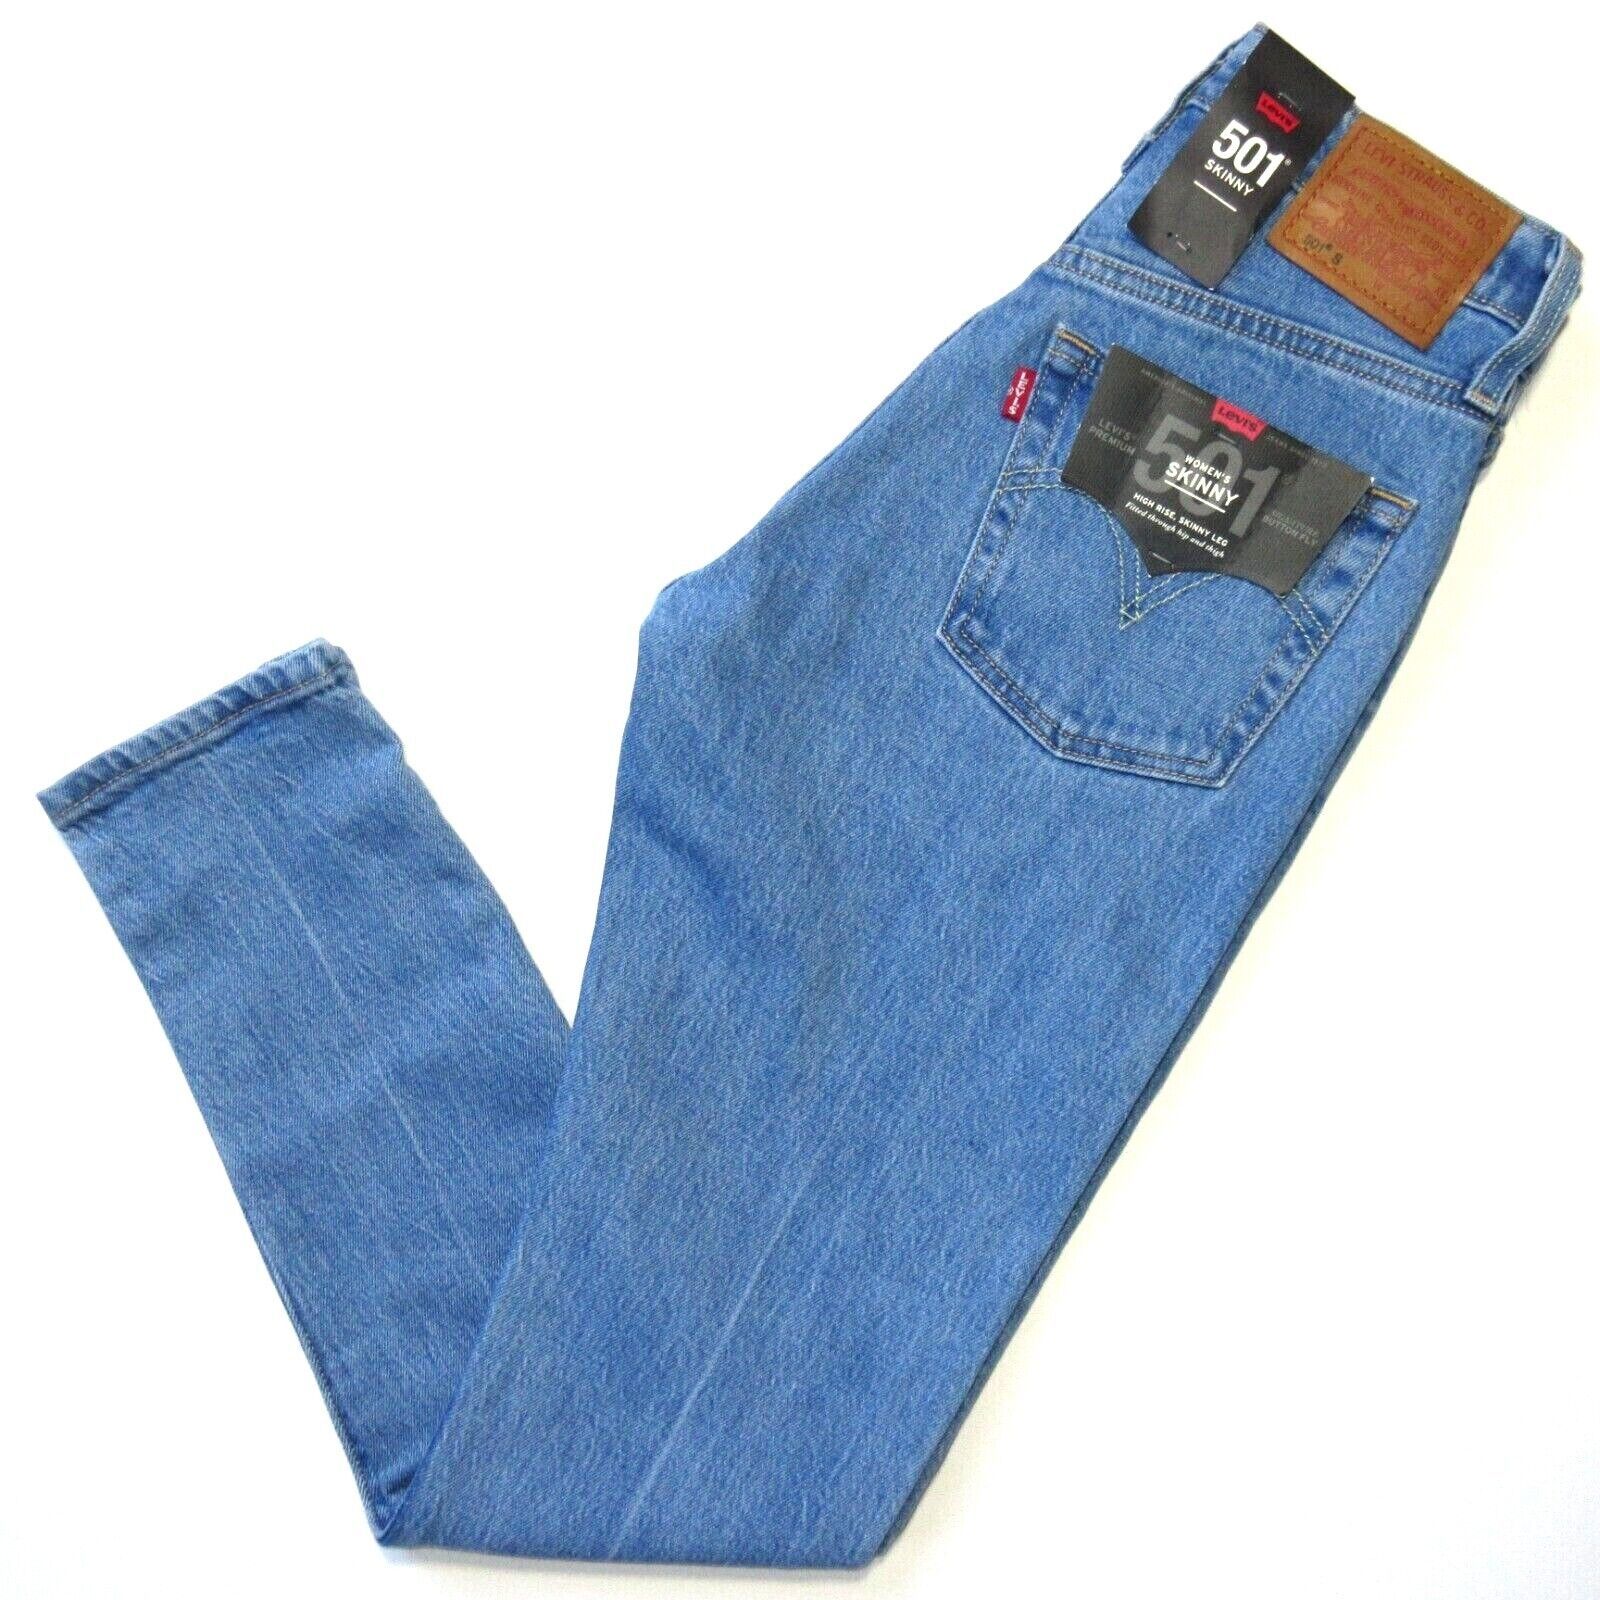 Primary image for NWT Levi's 501 Skinny in Jive Depths Heavyweight Stretch Denim Crop Jeans 25